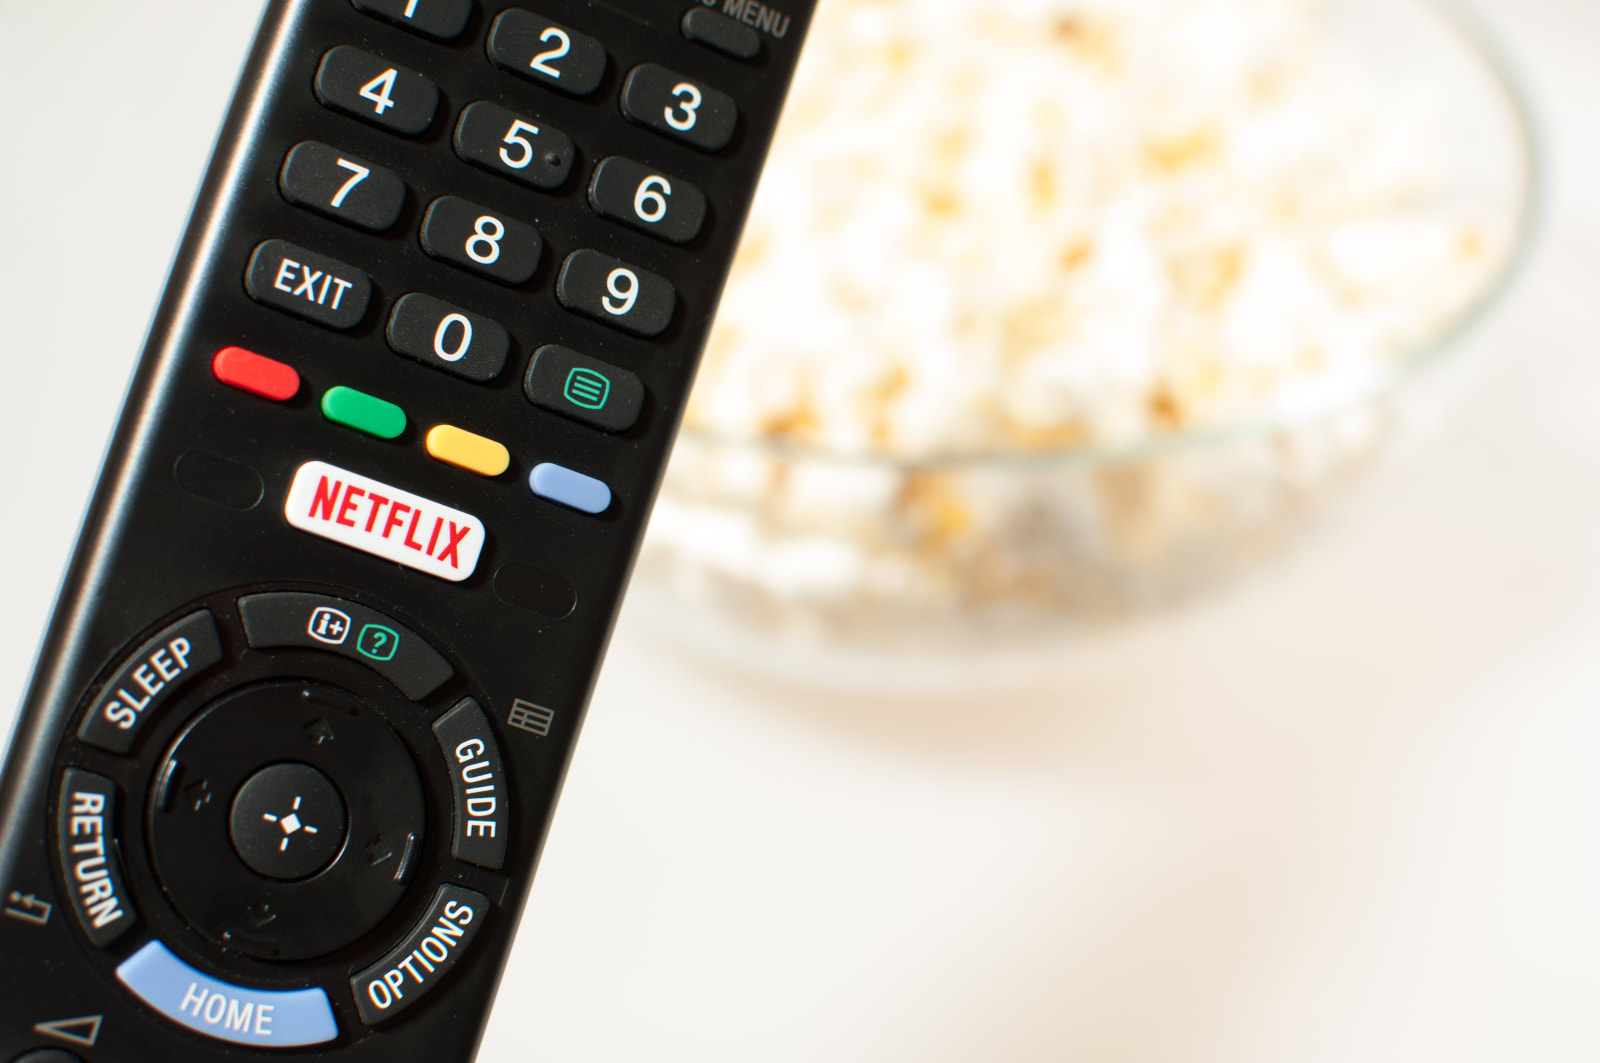 Remote control smart TV with Netflix button with popcorn.